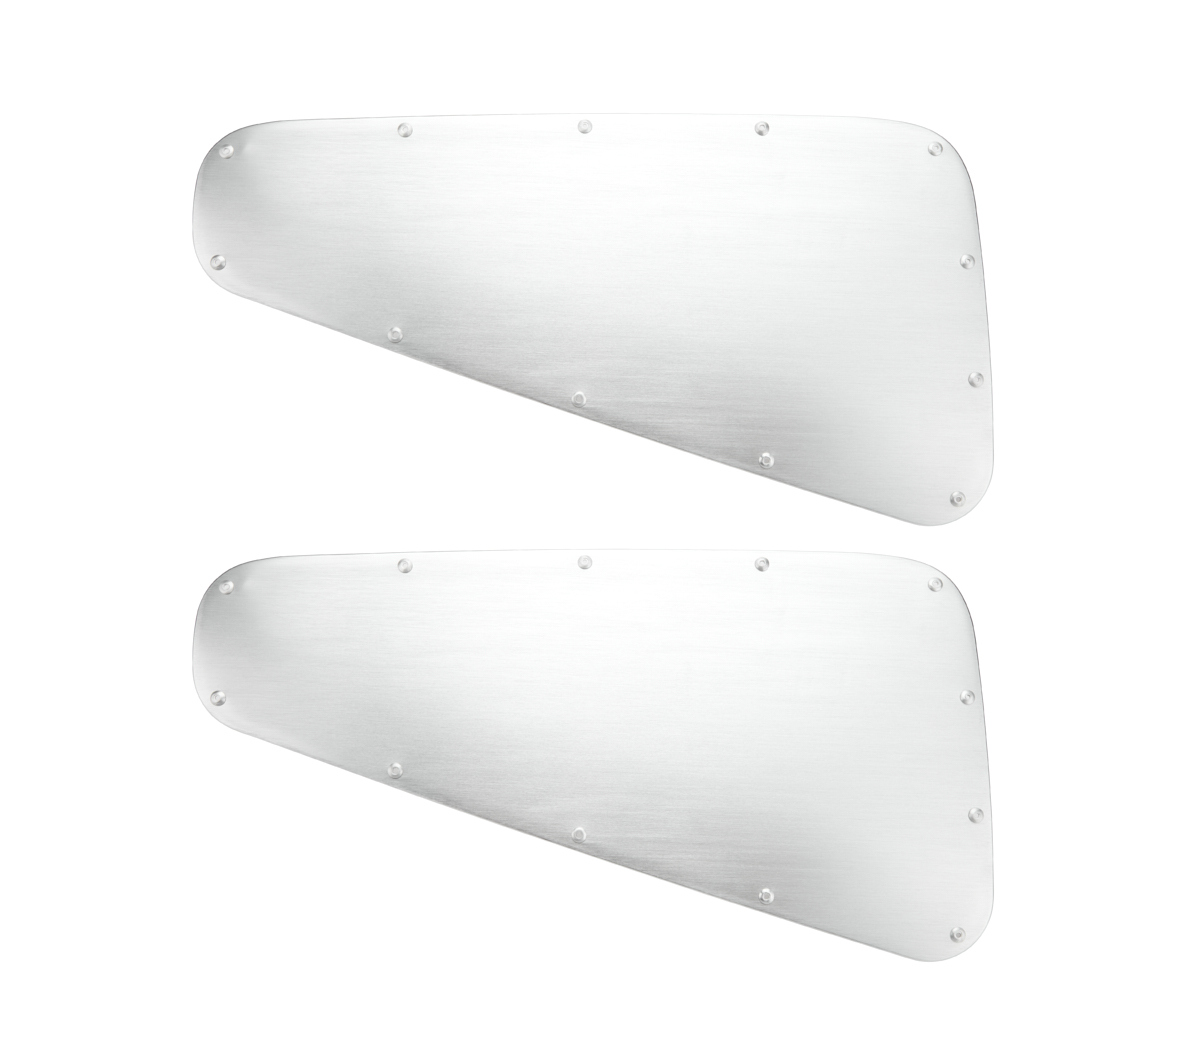 05-09 Mustang Quarter Glass Covers